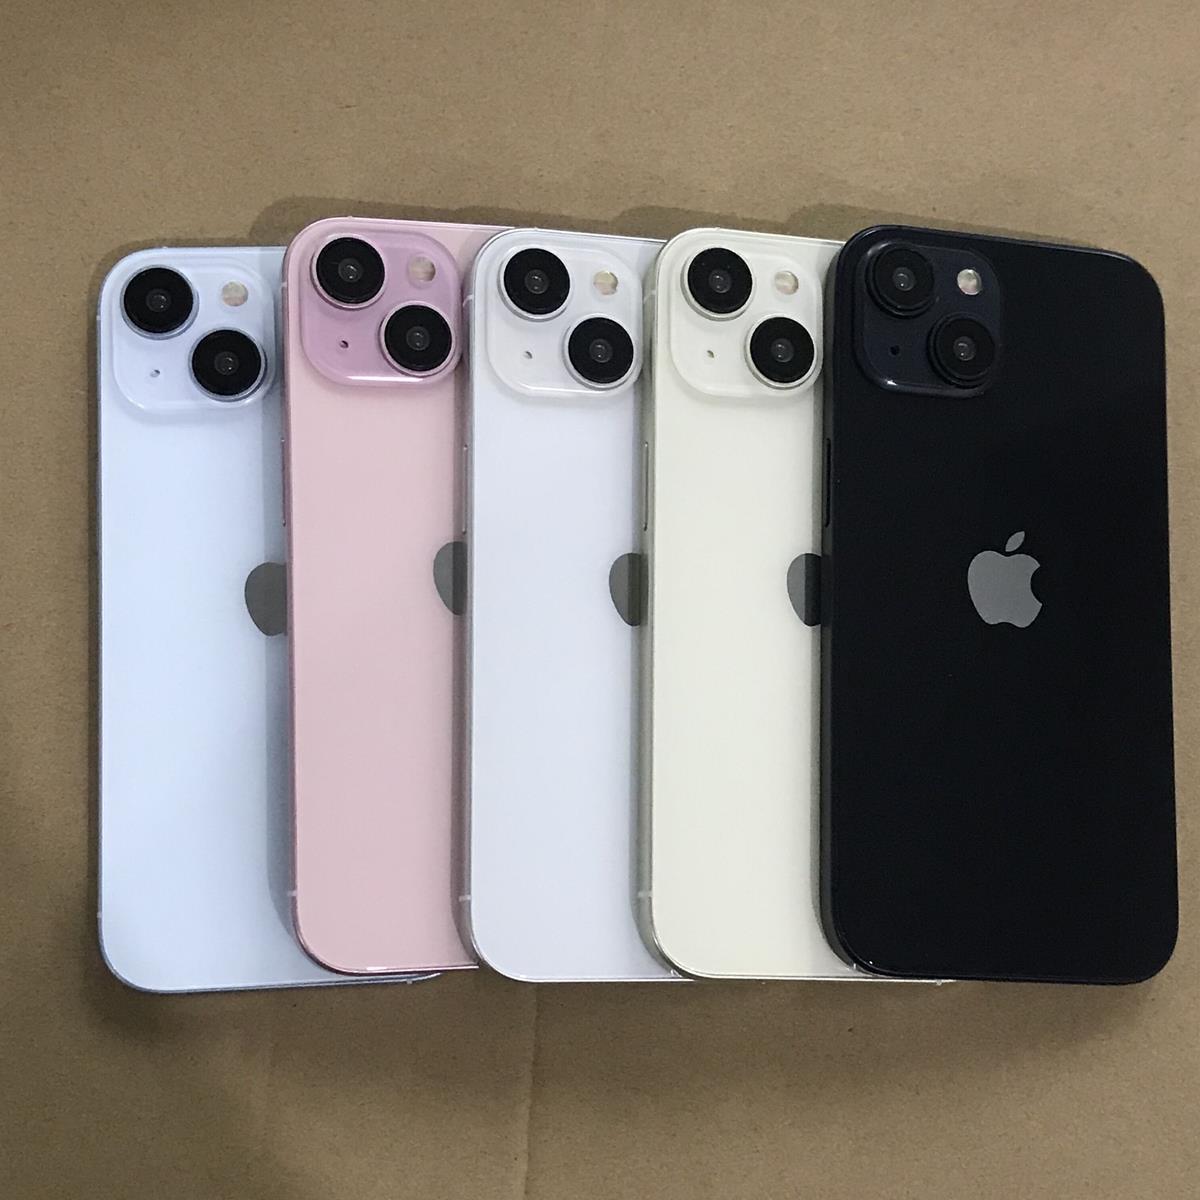 iPhone 15 colors and design revealed via dummy models